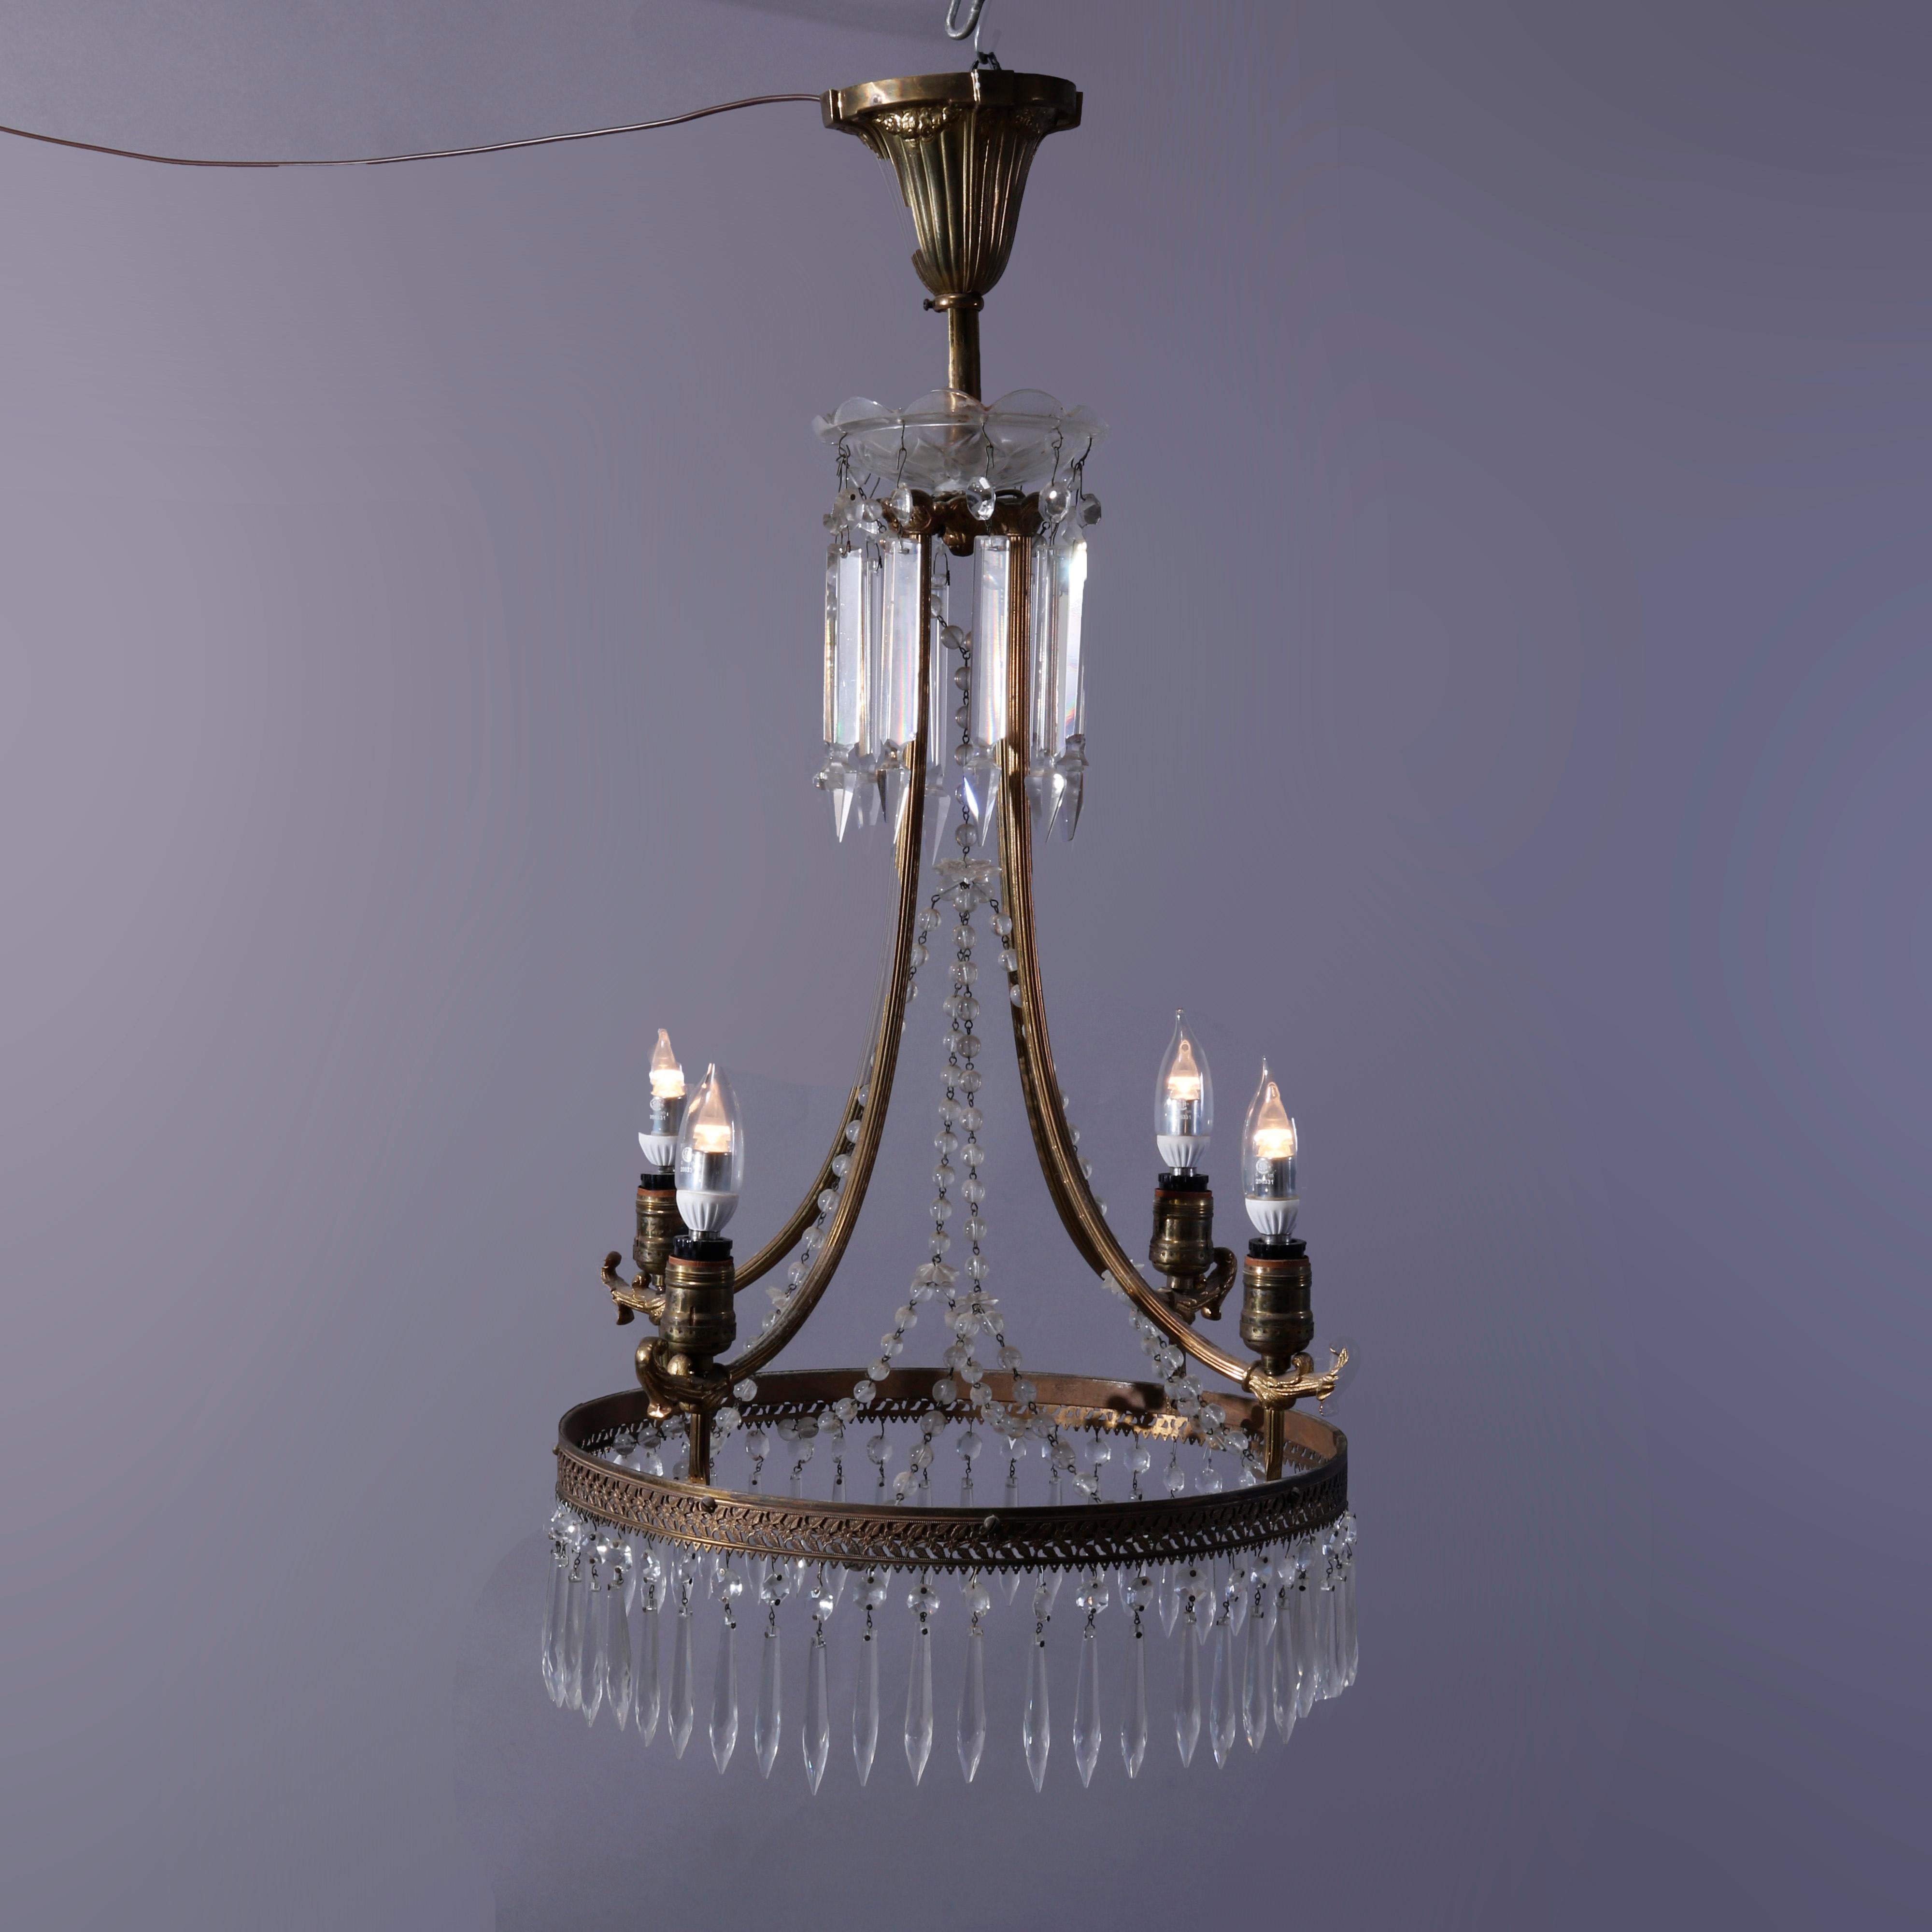 An antique French style chandelier offers bronzed metal frame with four scroll form arms terminating in a drop pierced crown having four lights, cut drop and draping strung crystal highlights throughout, classic Roaring '20's, c1920

Measures -